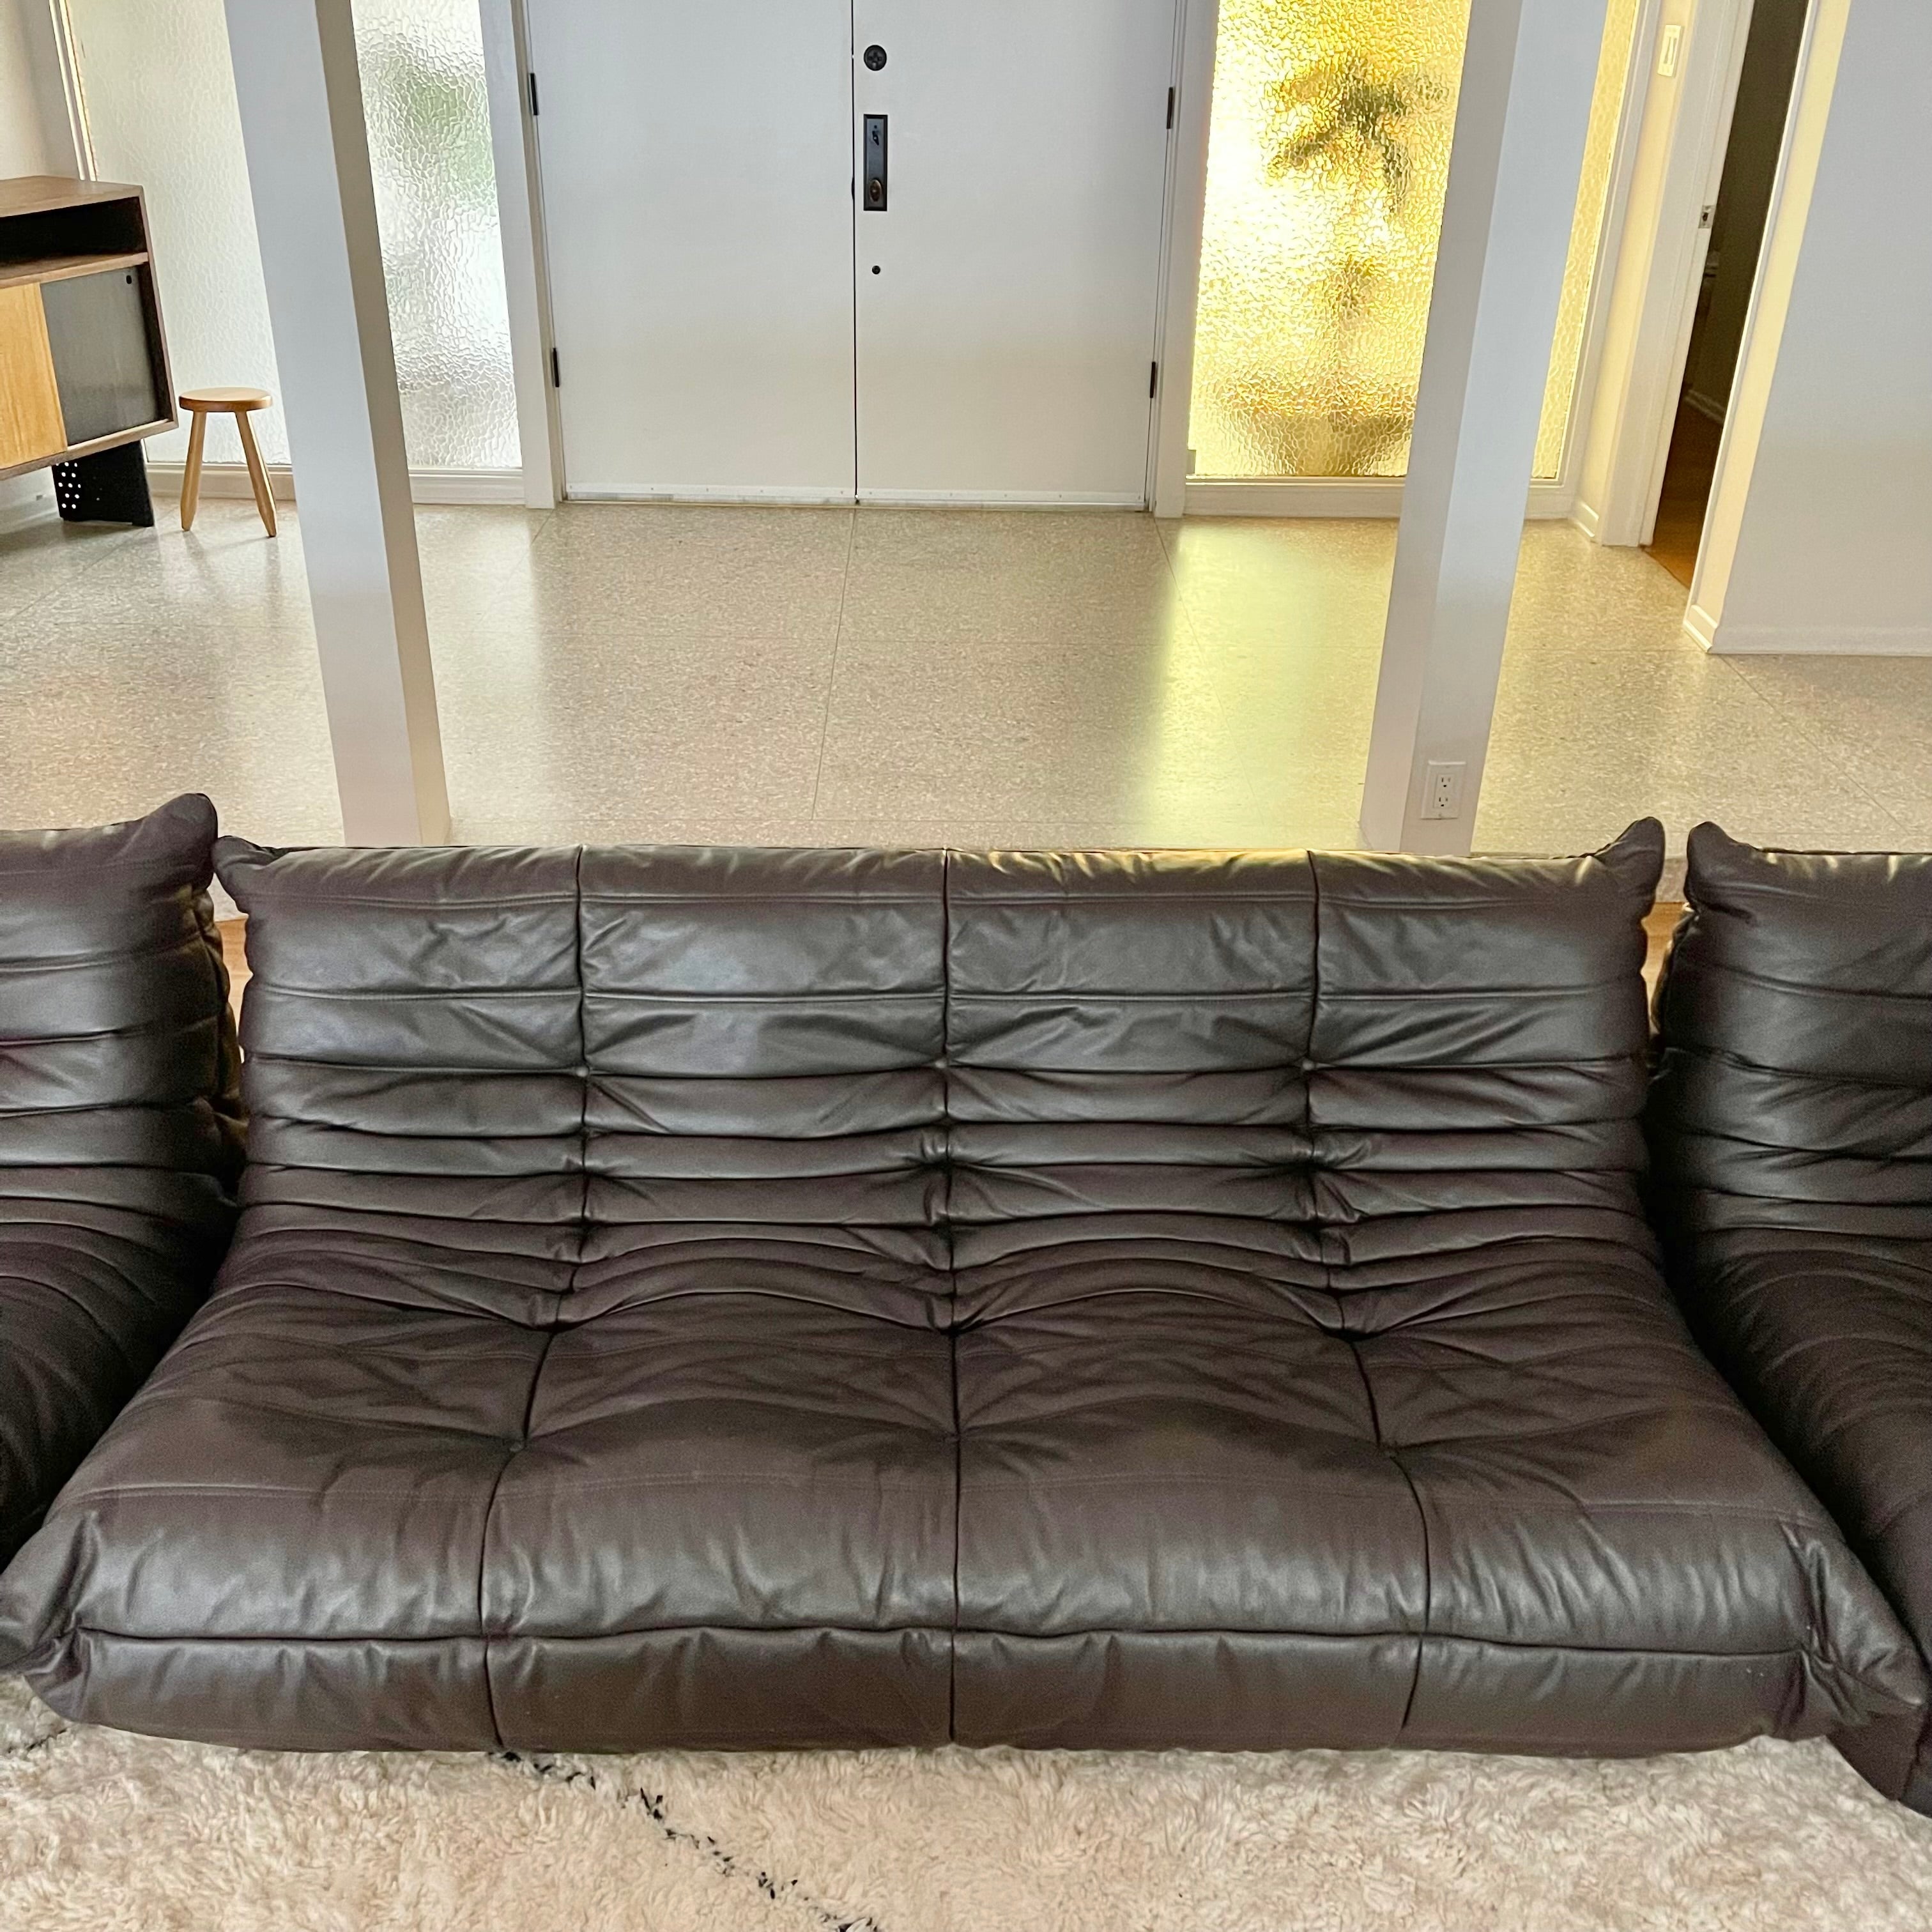 Togo Modular Sofa in Brown Leather by Michel Ducaroy for Ligne Roset,  1980s, Set of 5